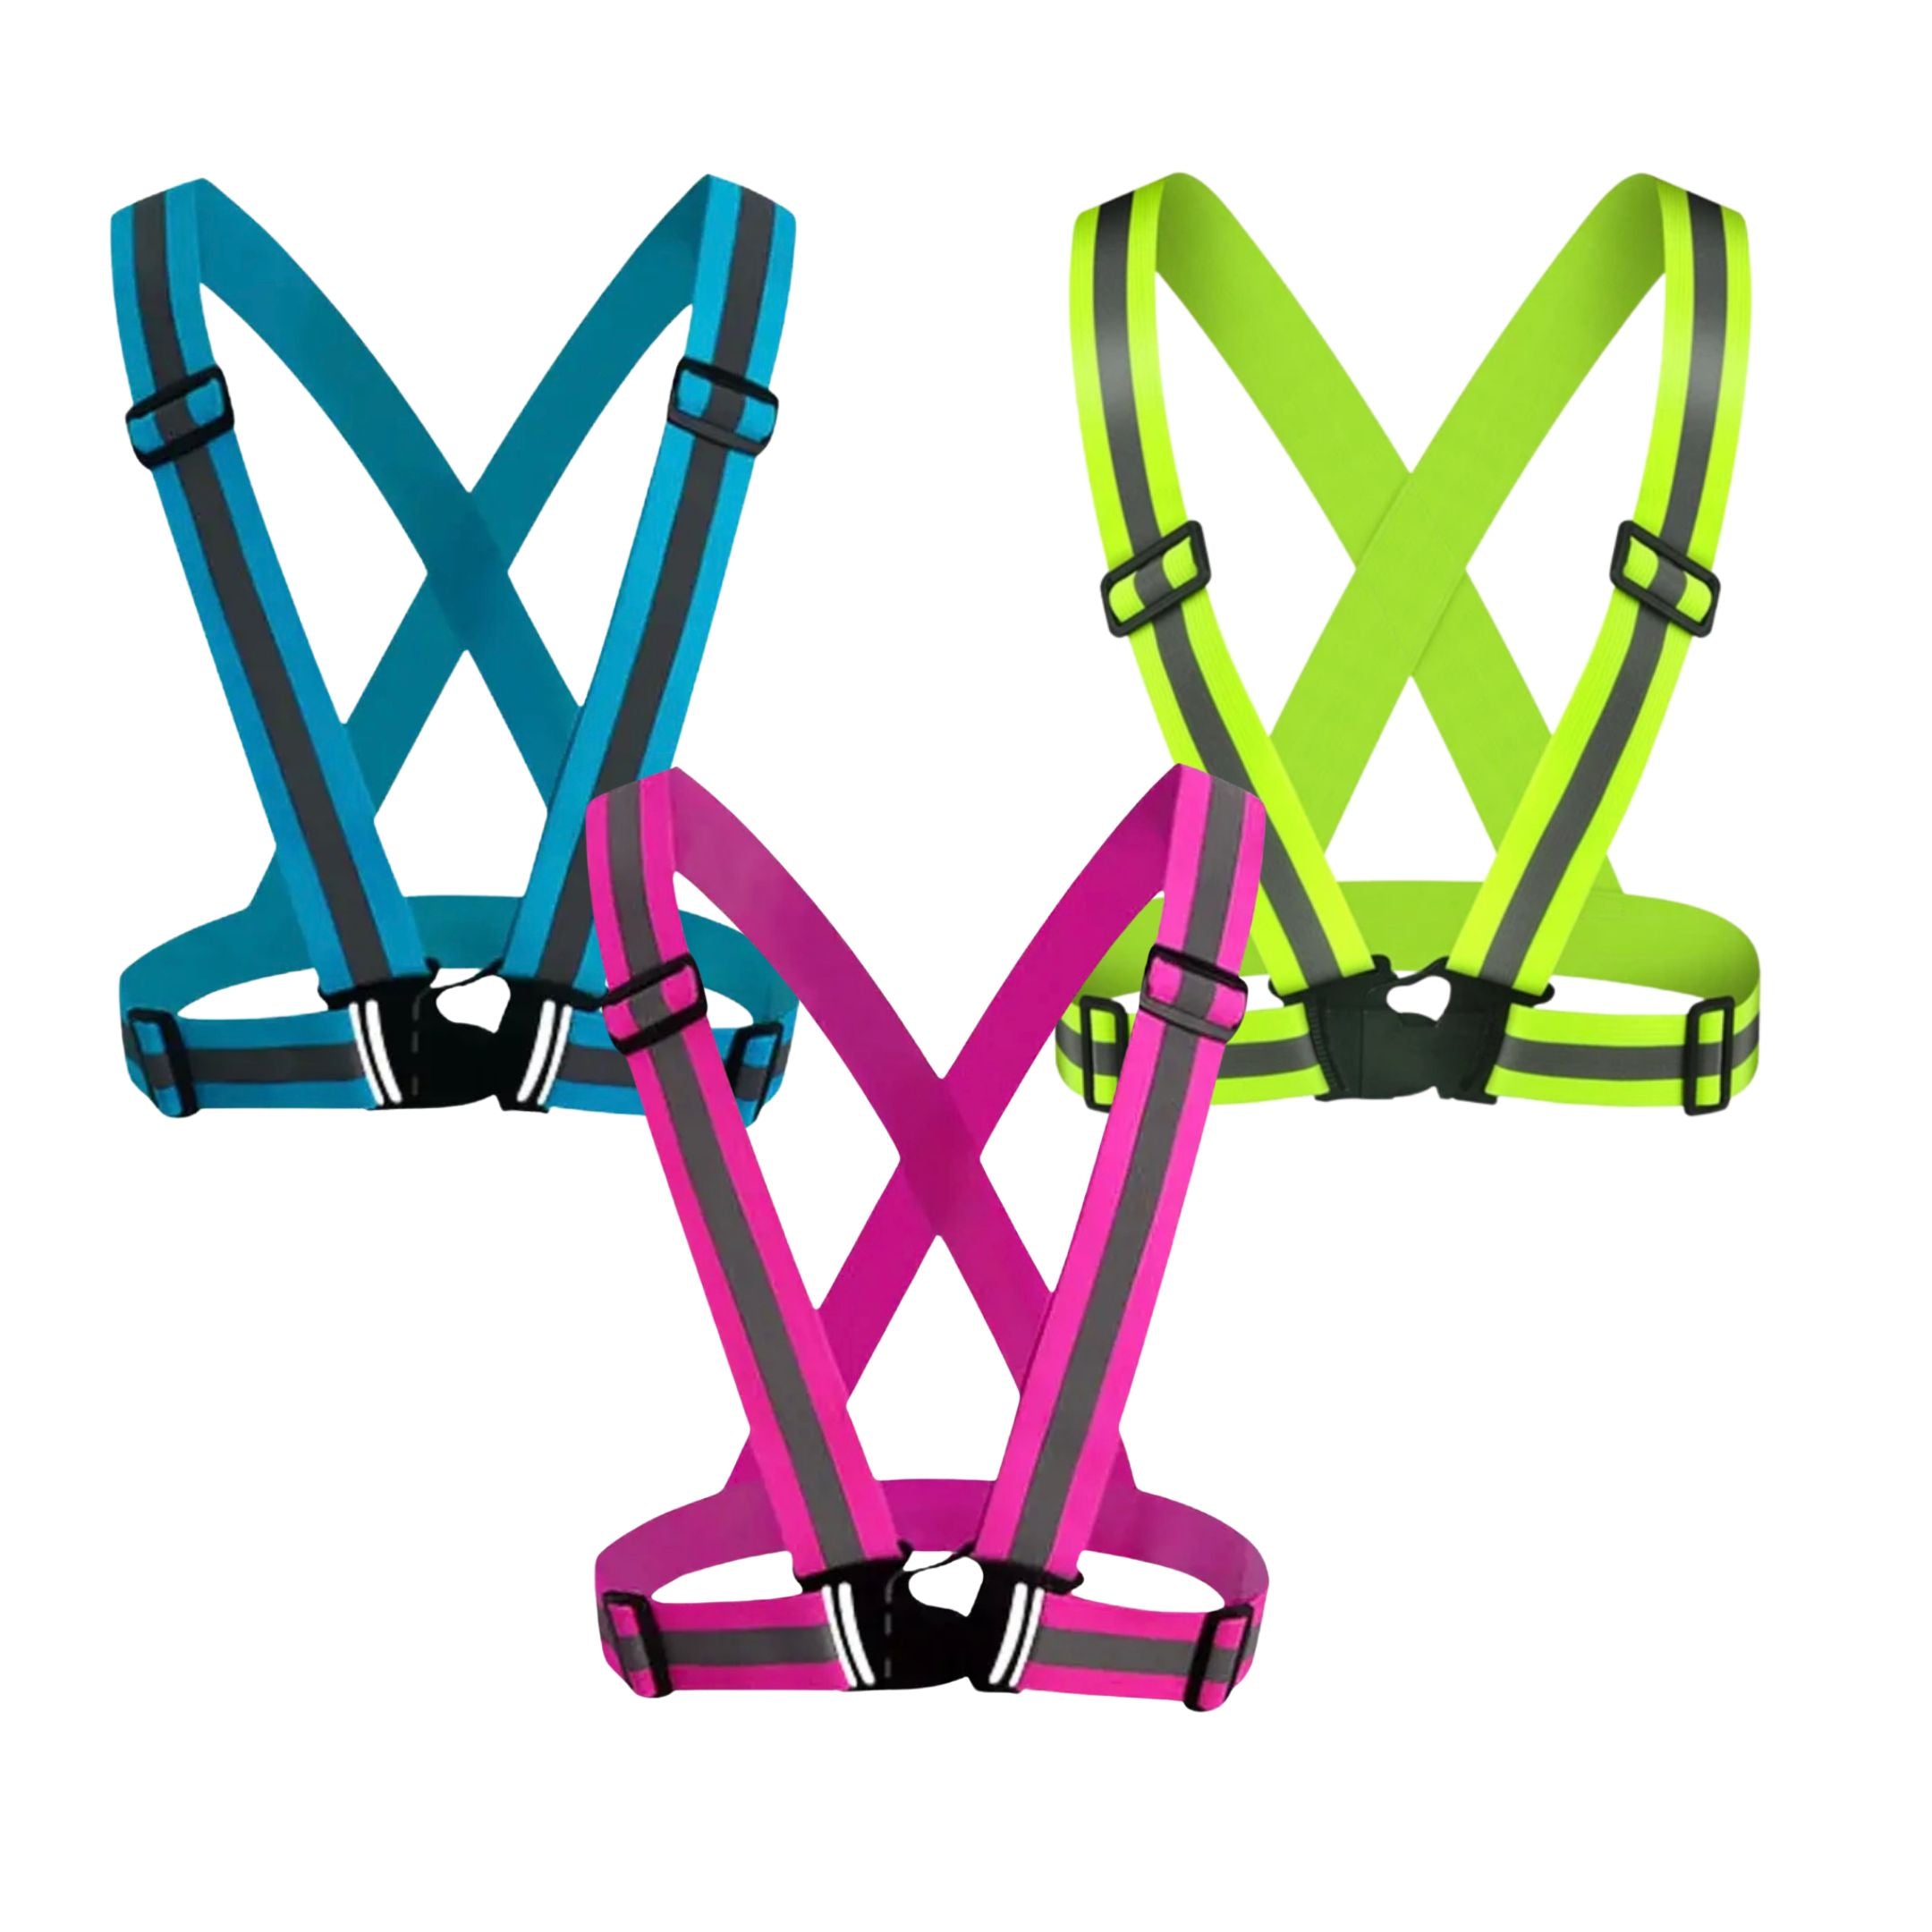 Riders Safety Harness - Great For Track or Night Riding so your seen easily on the roads